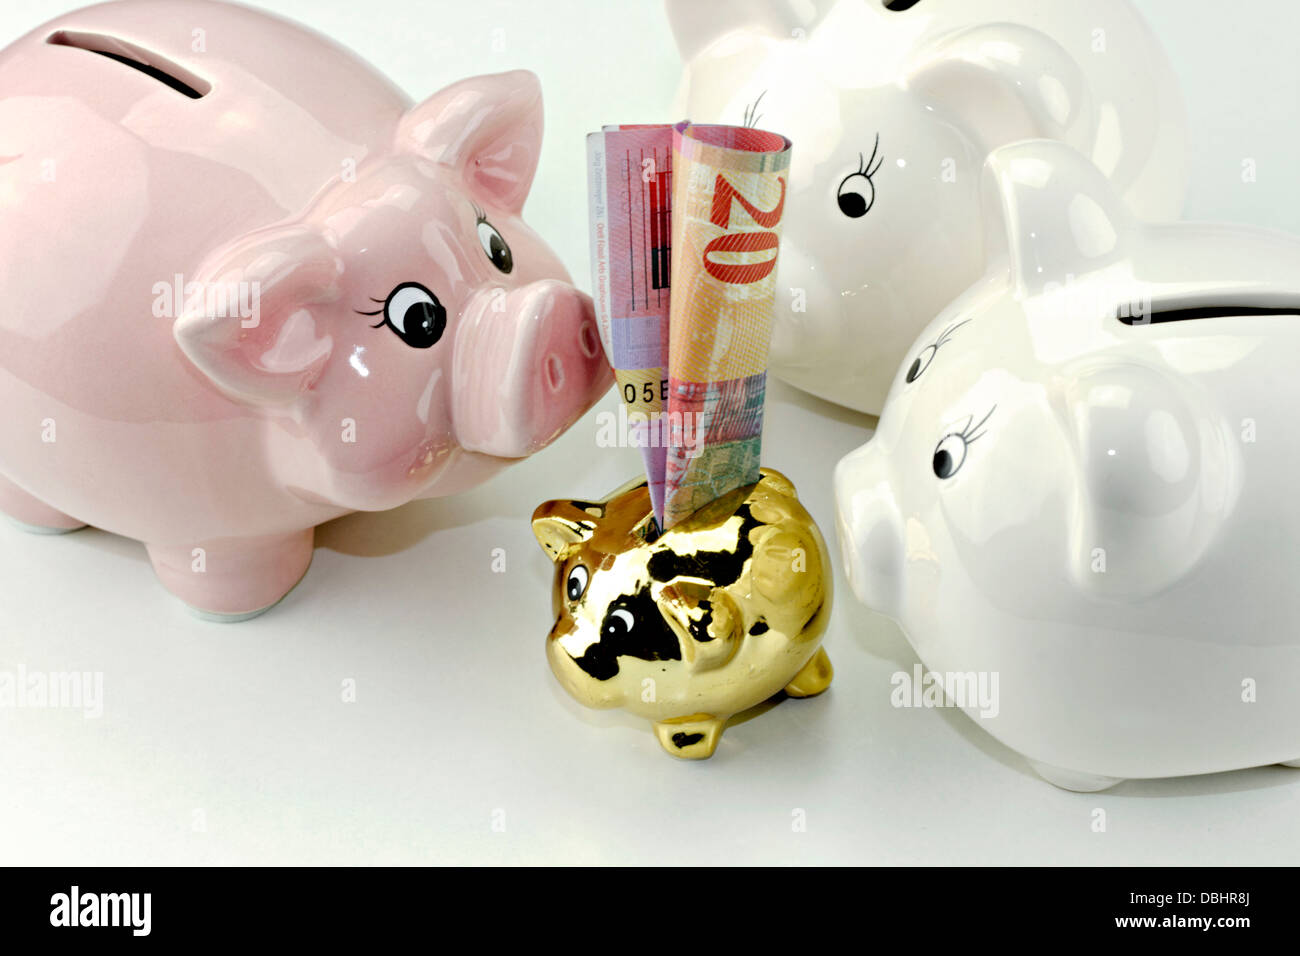 Swiss Twenty Franken Bank Note stuck in a golden Piggy Bank Money Box surrounded by other Piggy Banks Stock Photo